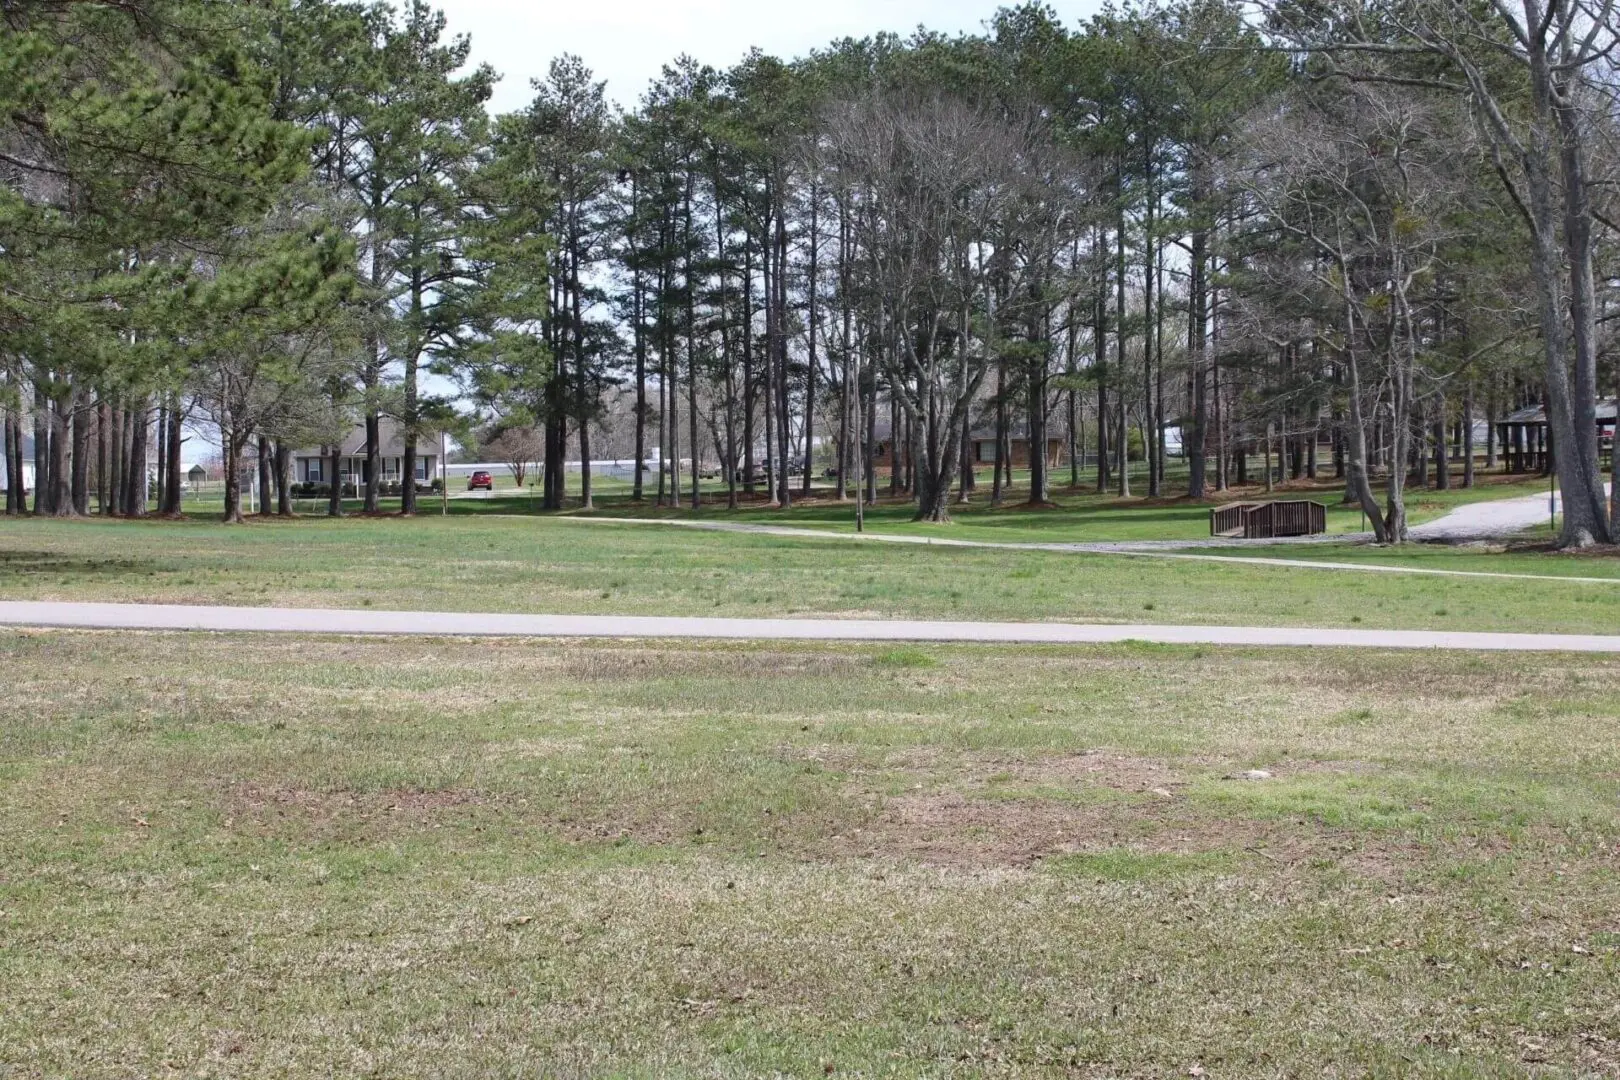 A grassy area with trees and a road.